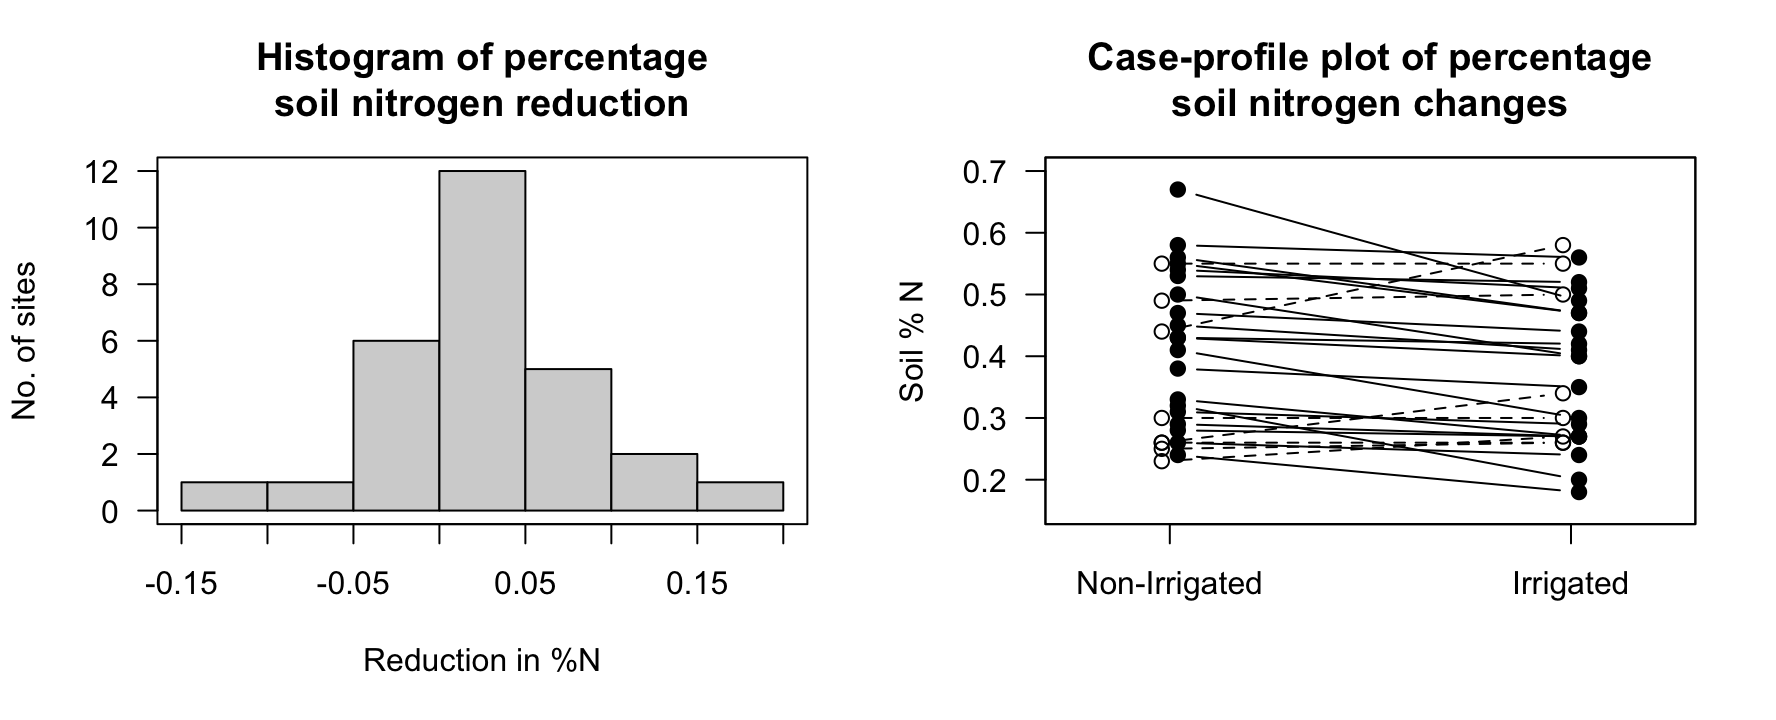 The reduction in percentage N when sites are irrigated, compared to non-irrigated. Left: A histogram, Right: a case-profile plot (solid lines, solid dots for lower percentage N in irrigated sites).